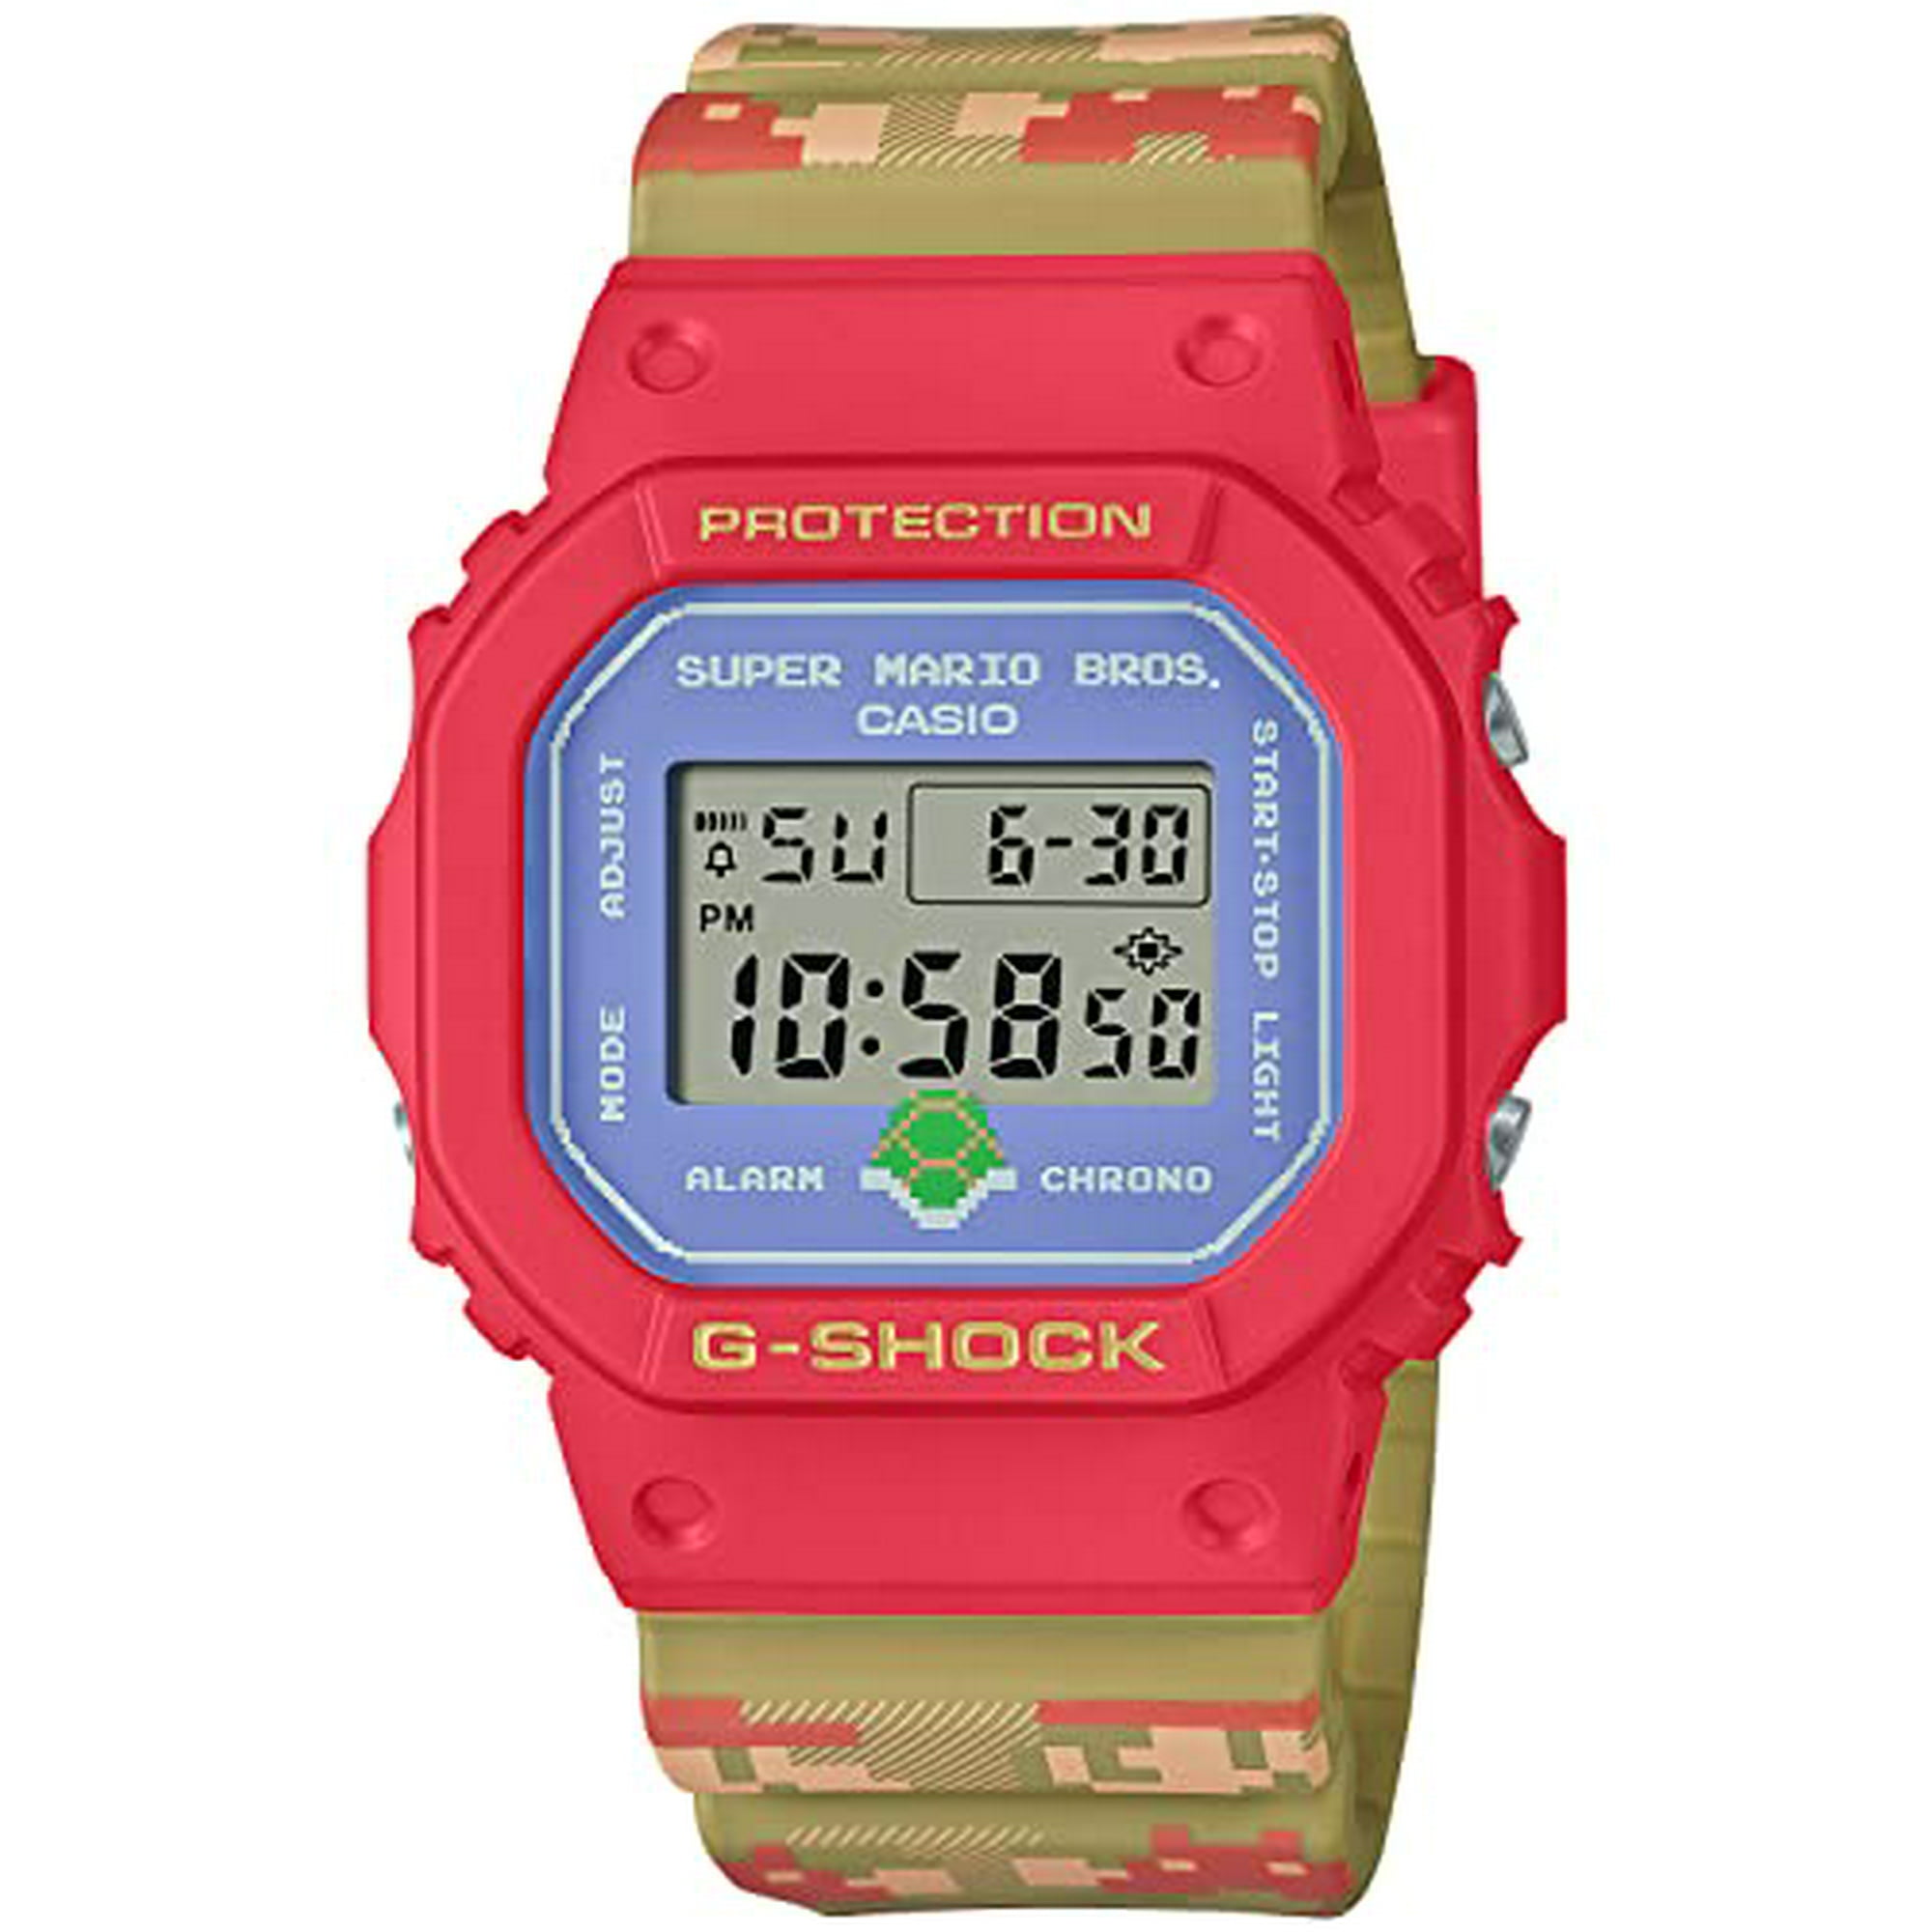 G-Shock] [Casio] Watch SUPER MARIO BROTHERS Collaboration Model DW